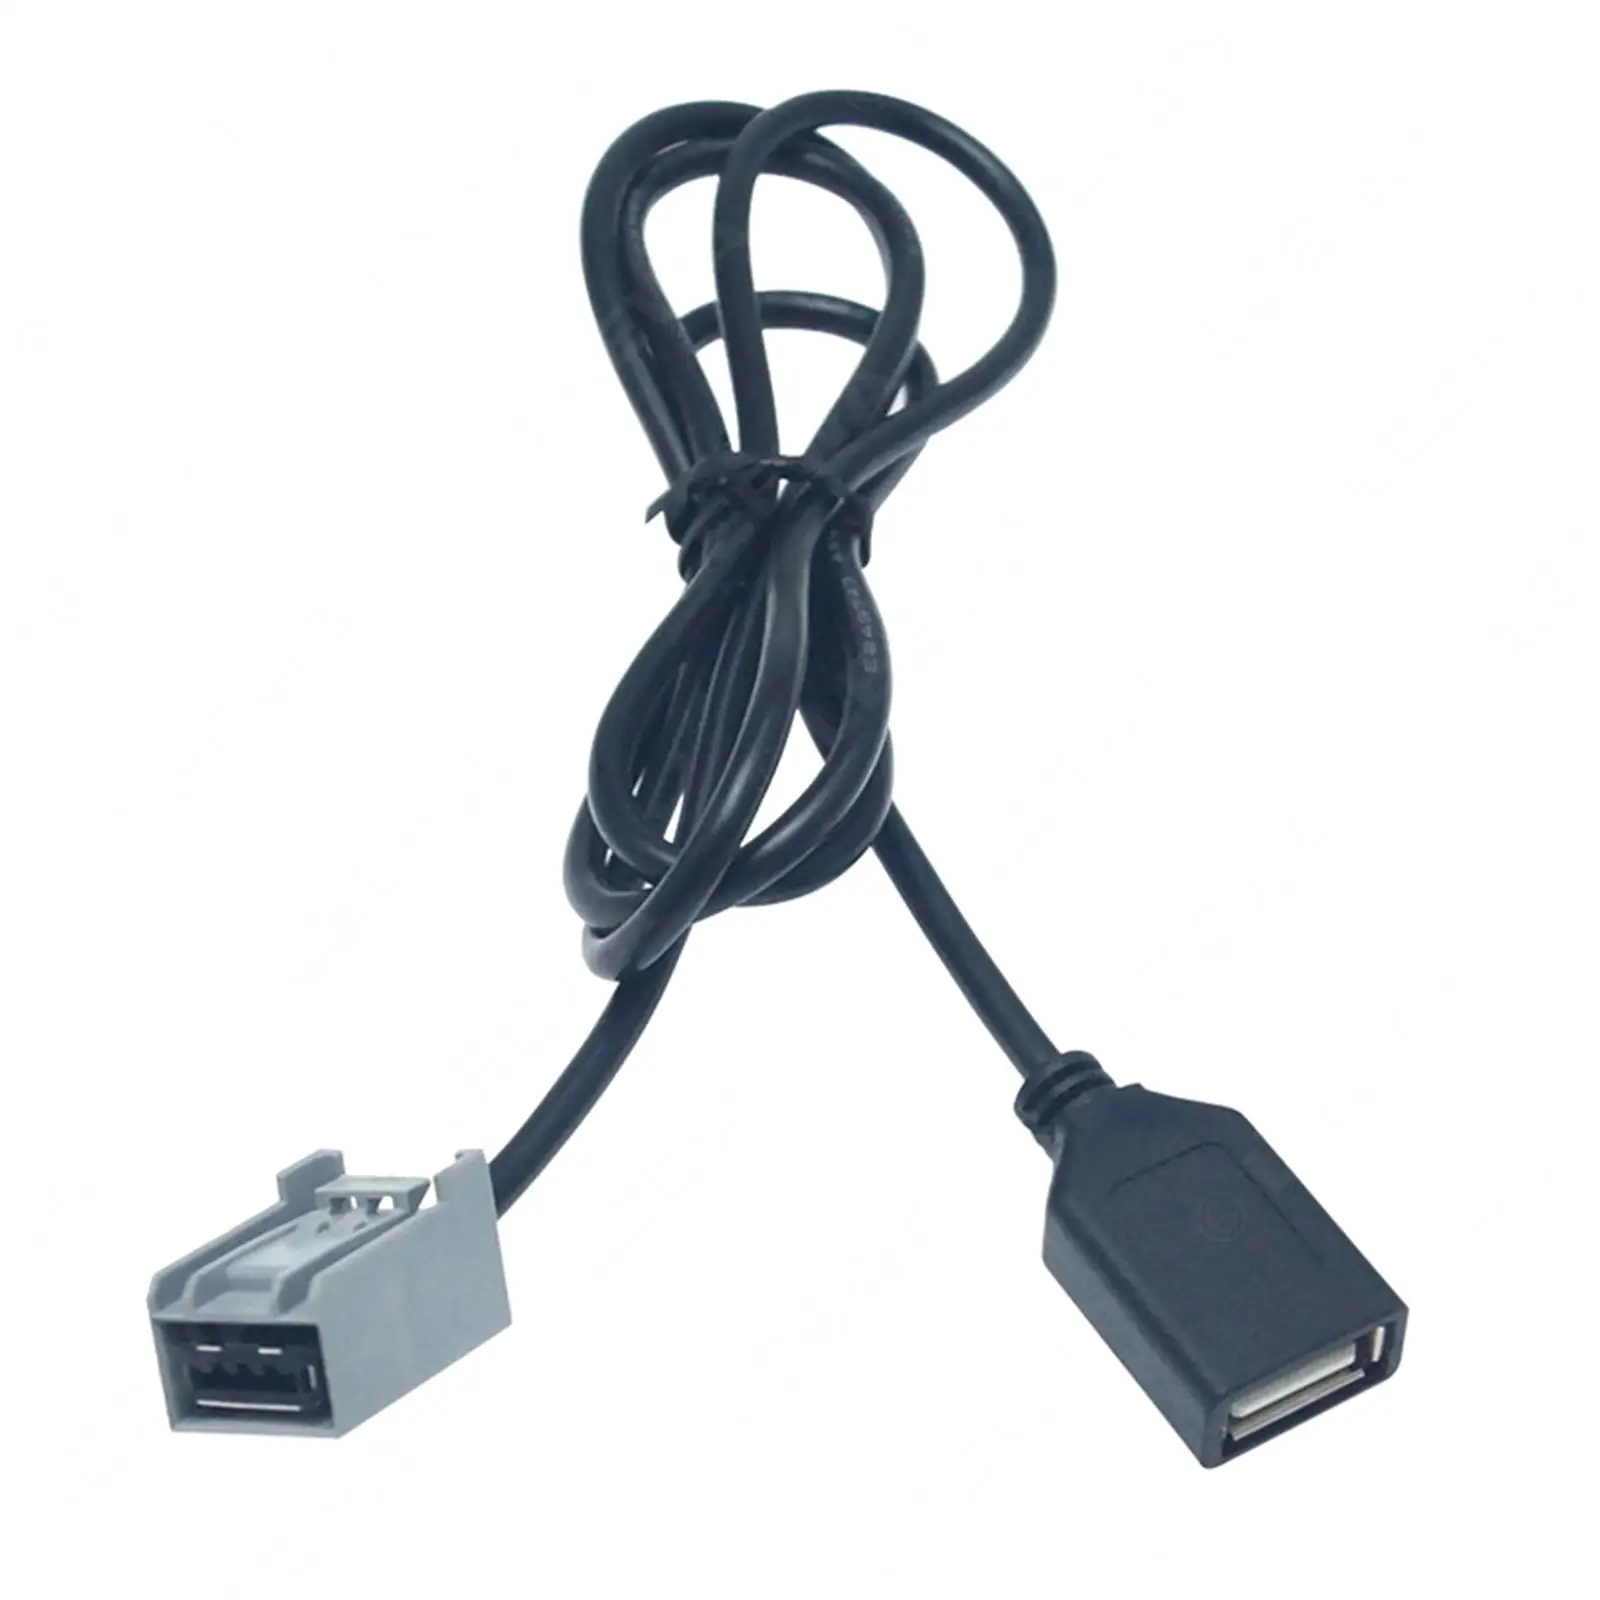 USB AUX Audio Adapter Cable Accessory Spare Parts for Honda Jazz from 2008 Honda Odyssey from 2009